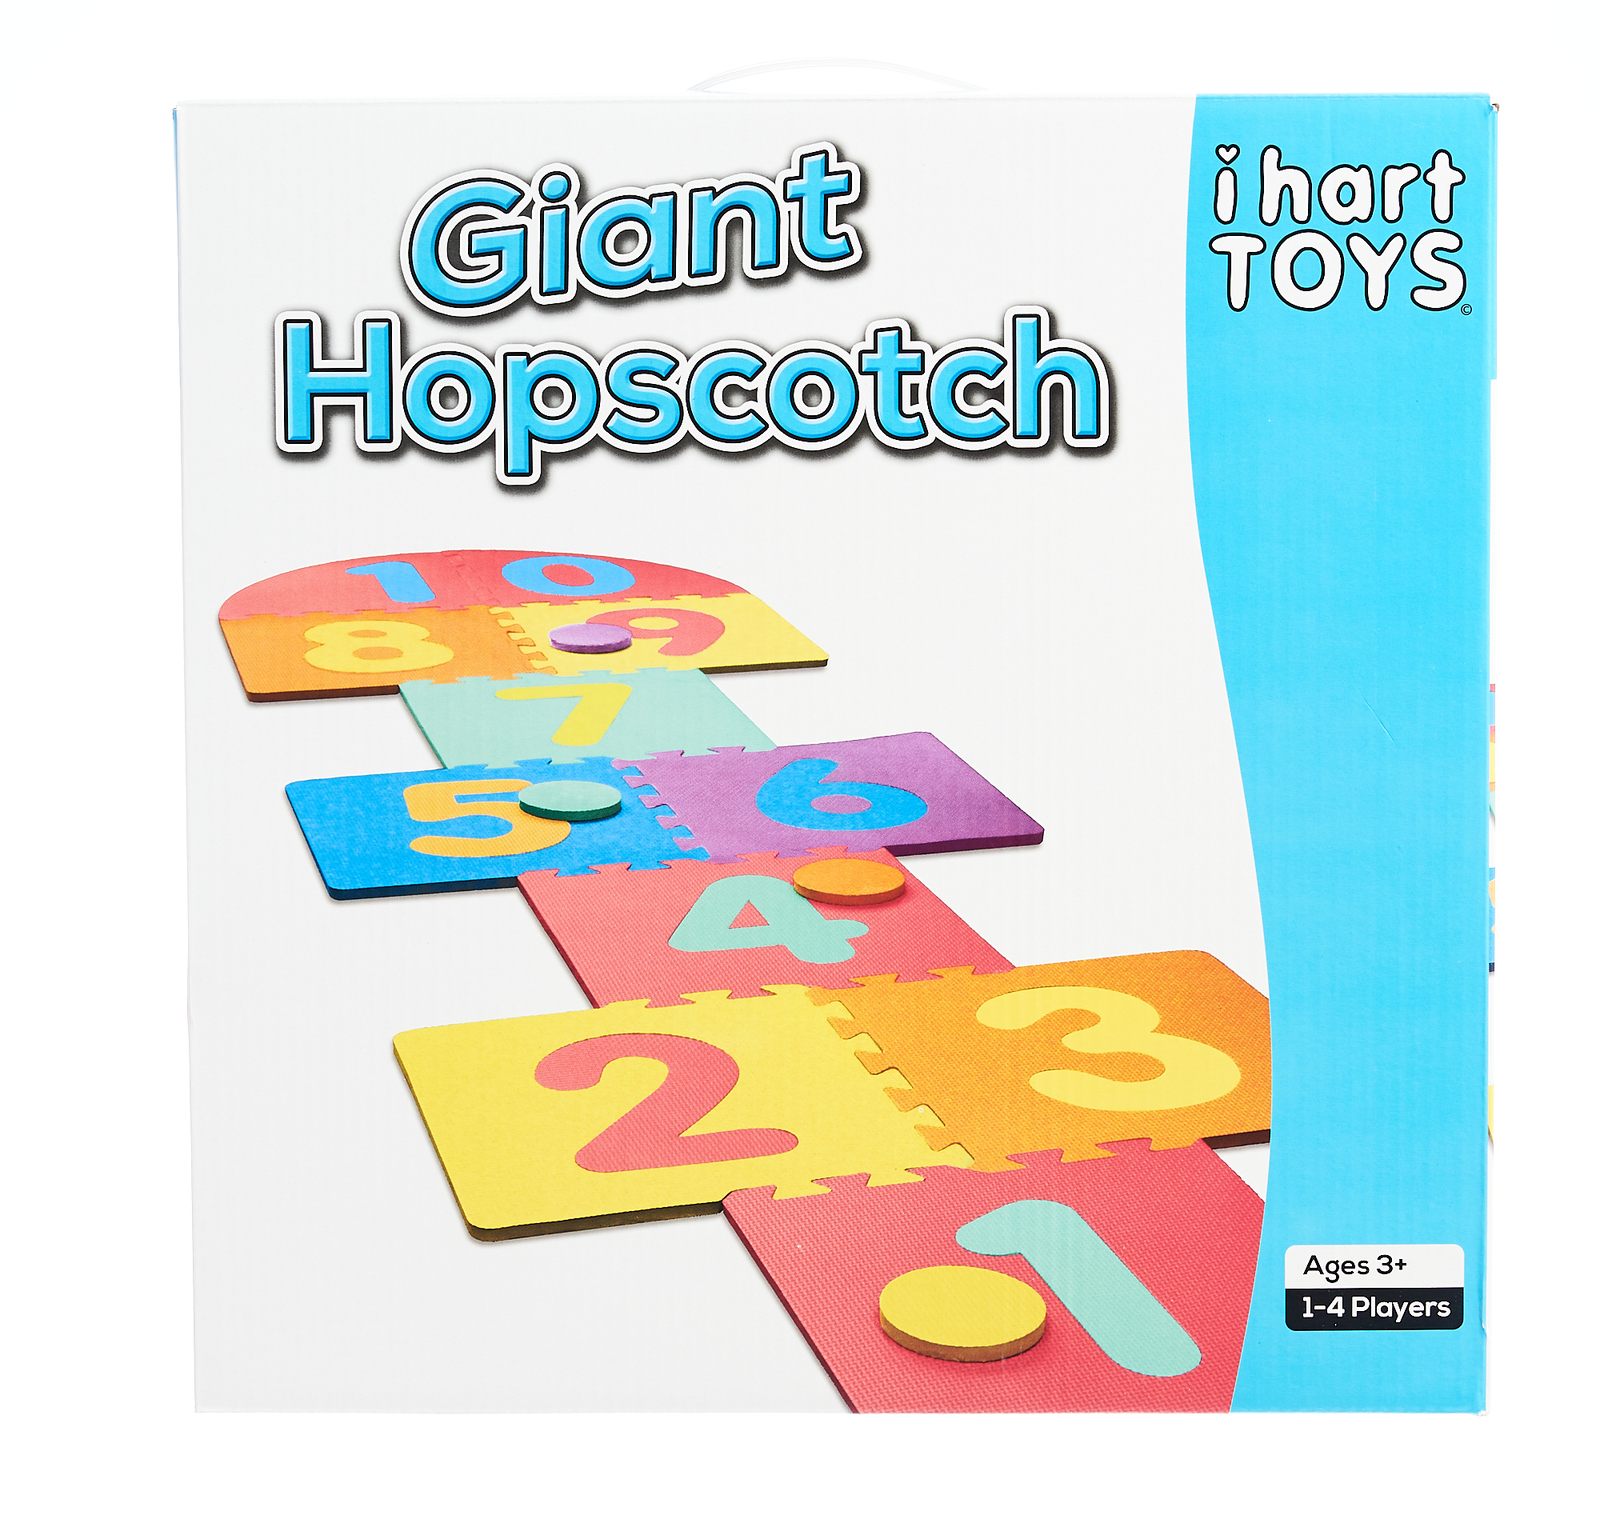 Giant Hopscotch Buy Kids Outdoor Toys Online At Iharttoys Australia